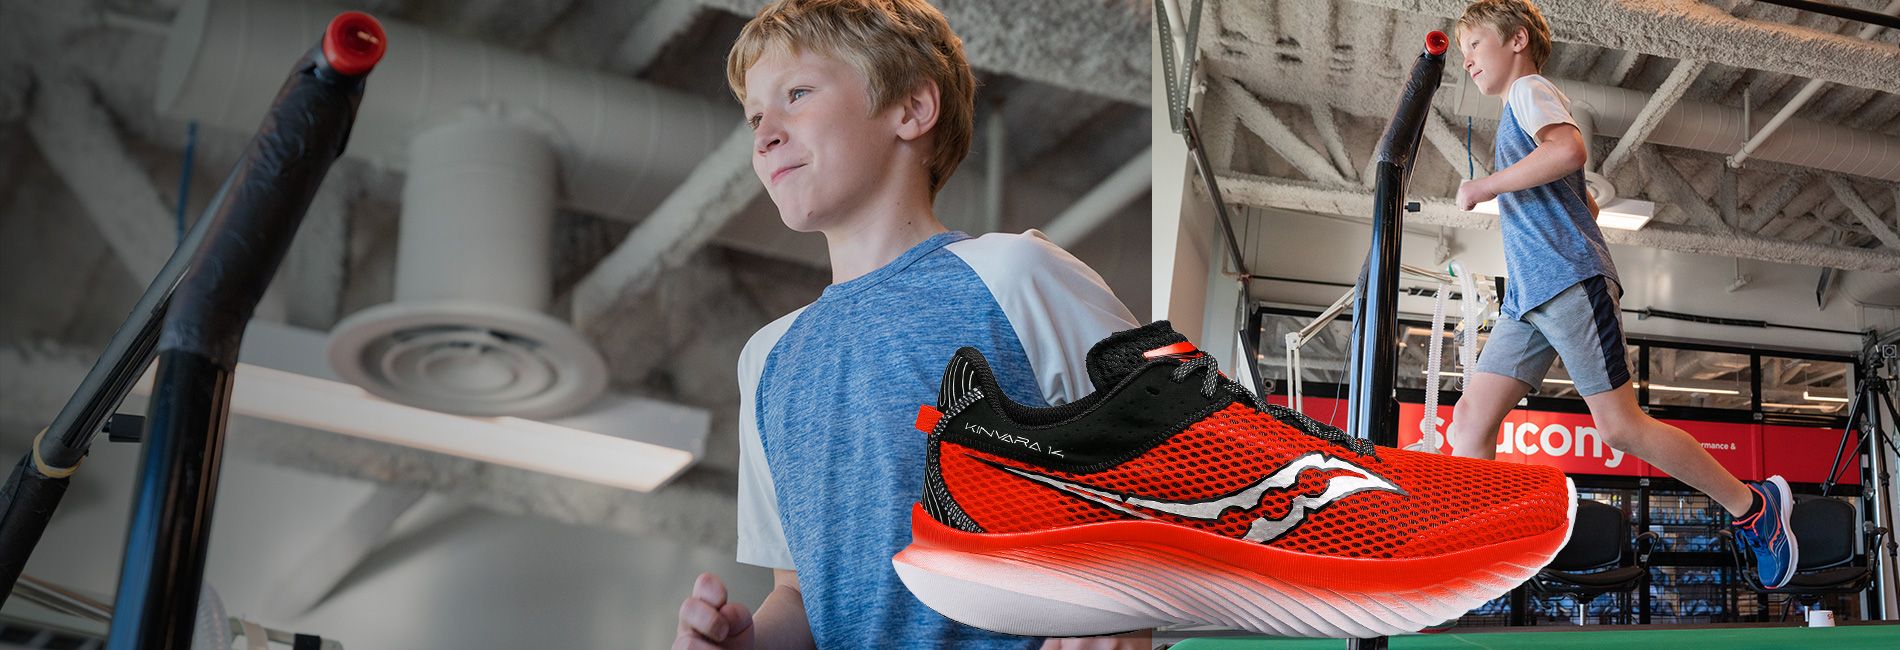 a boy looking at a red and black shoe